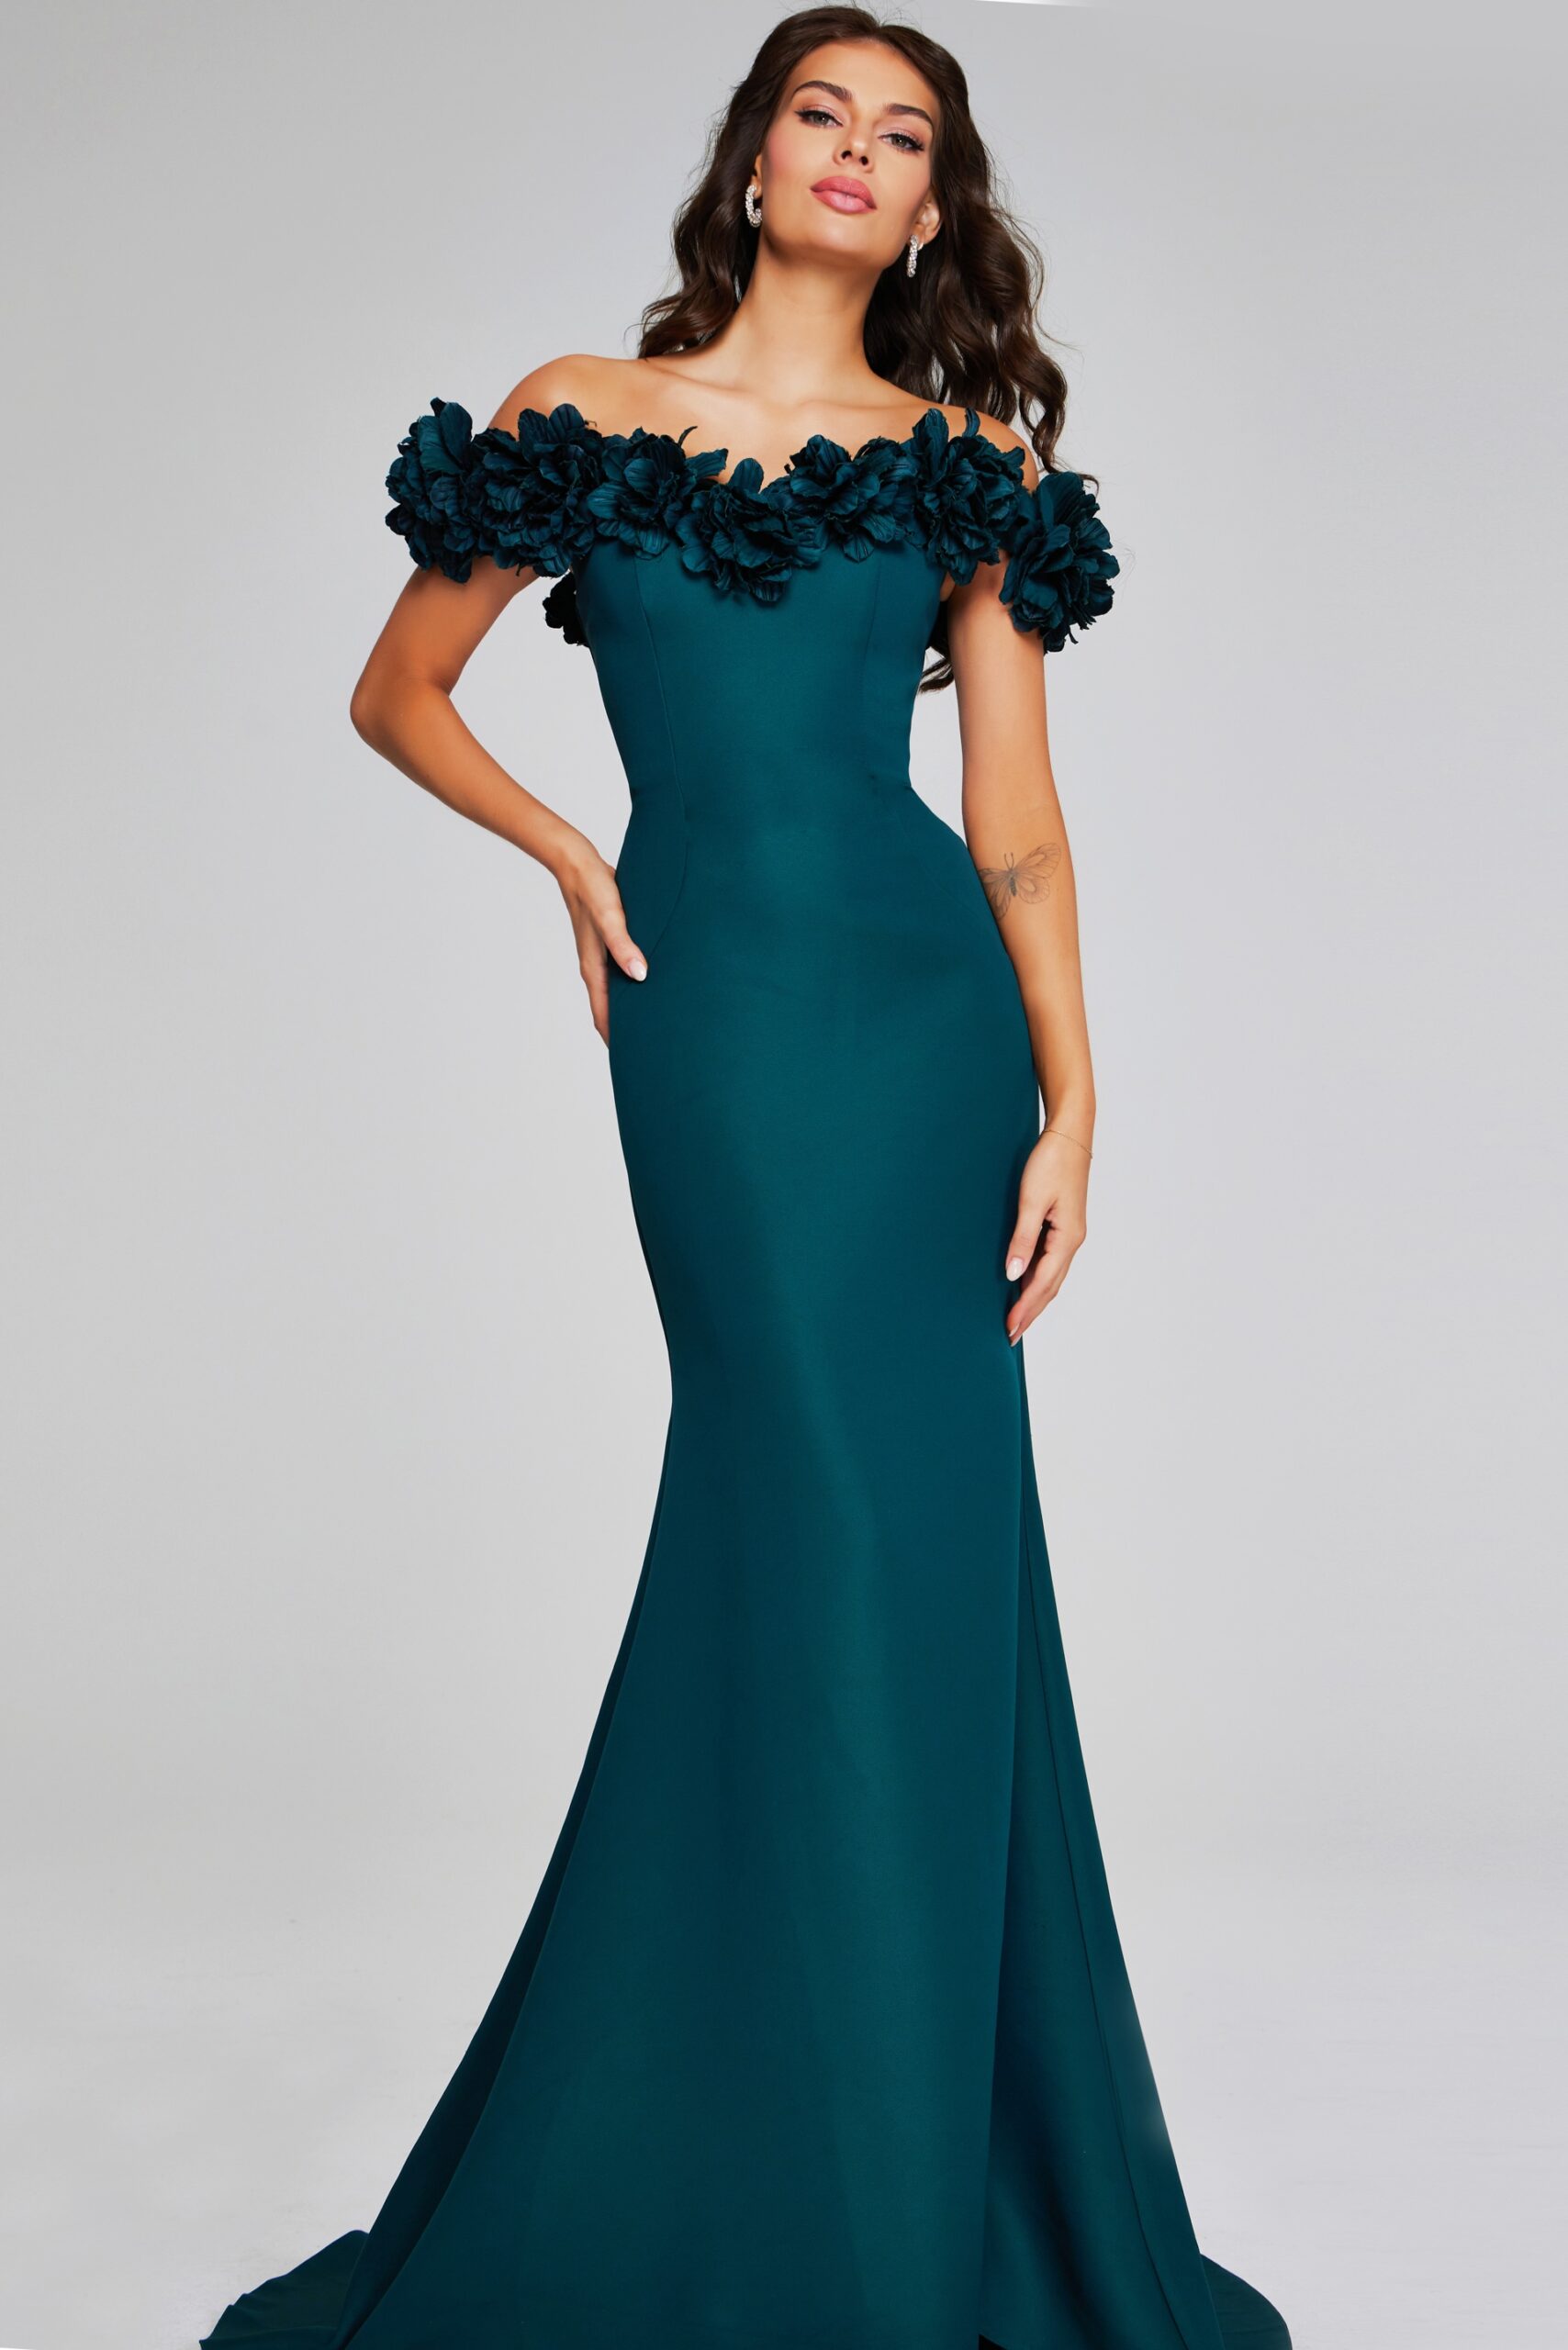 Enchanting Emerald Off-Shoulder Gown with Floral Embellishments 40595